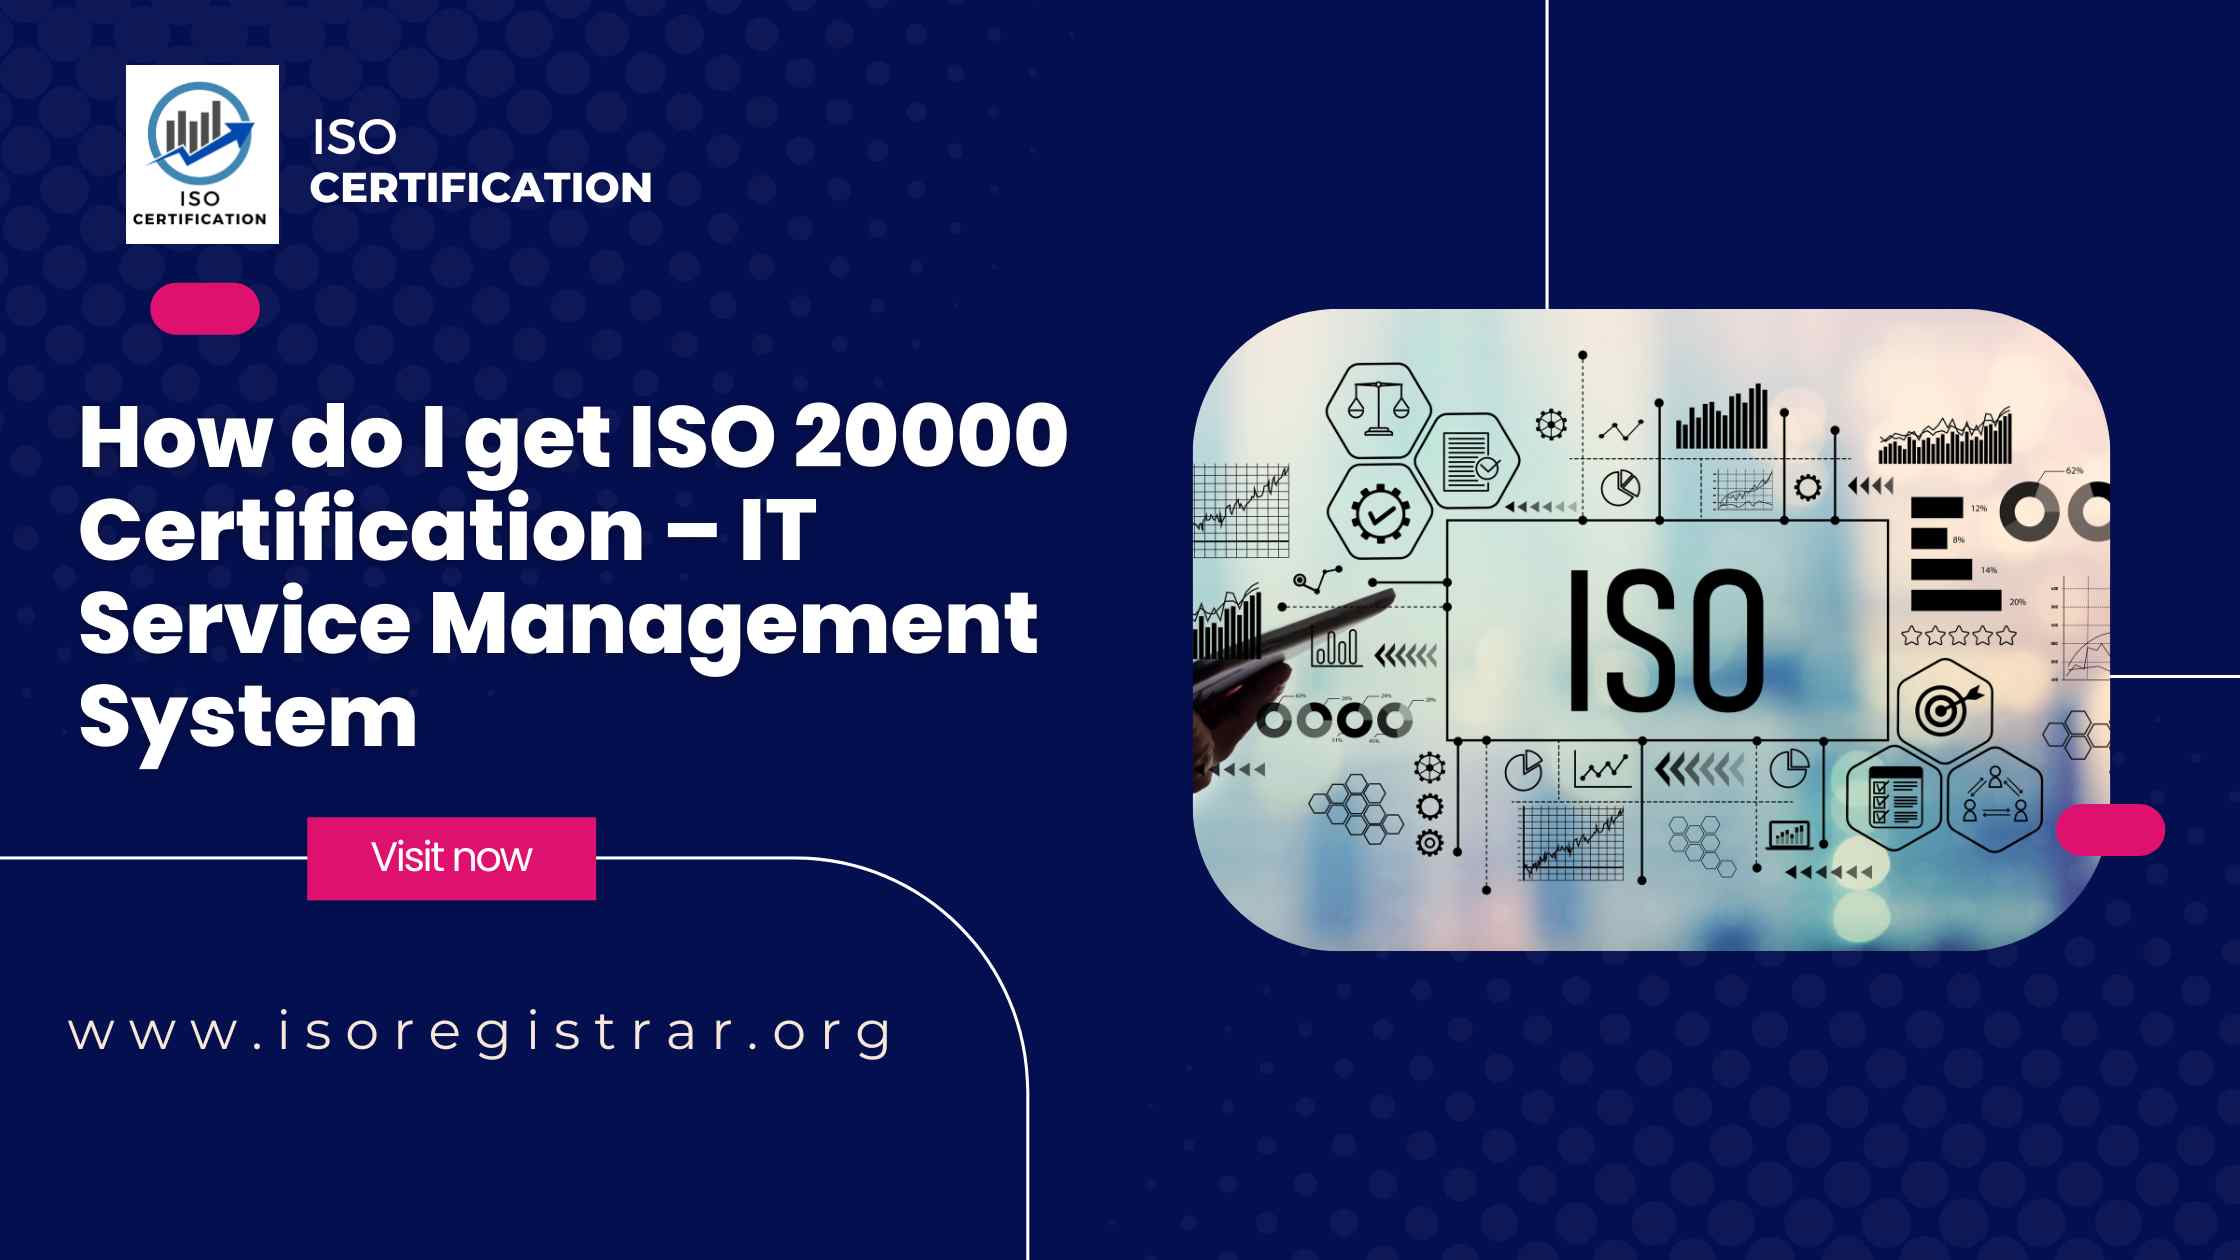 How do I get ISO 20000 Certification – IT Service Management System